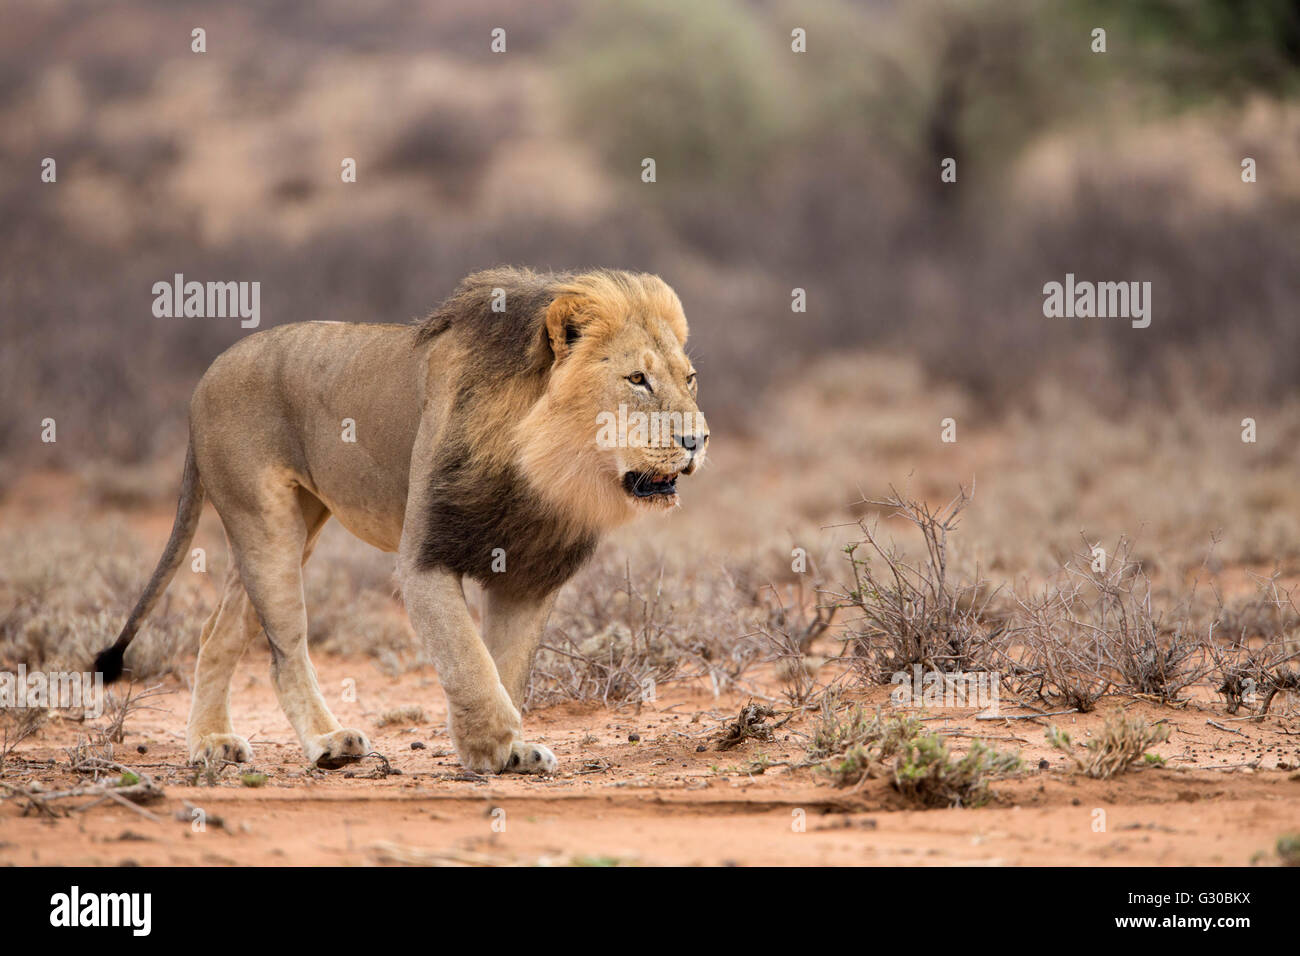 Lion (Panthera leo), Kgalagadi Transfrontier Park, Northern Cape, South Africa, Africa Stock Photo